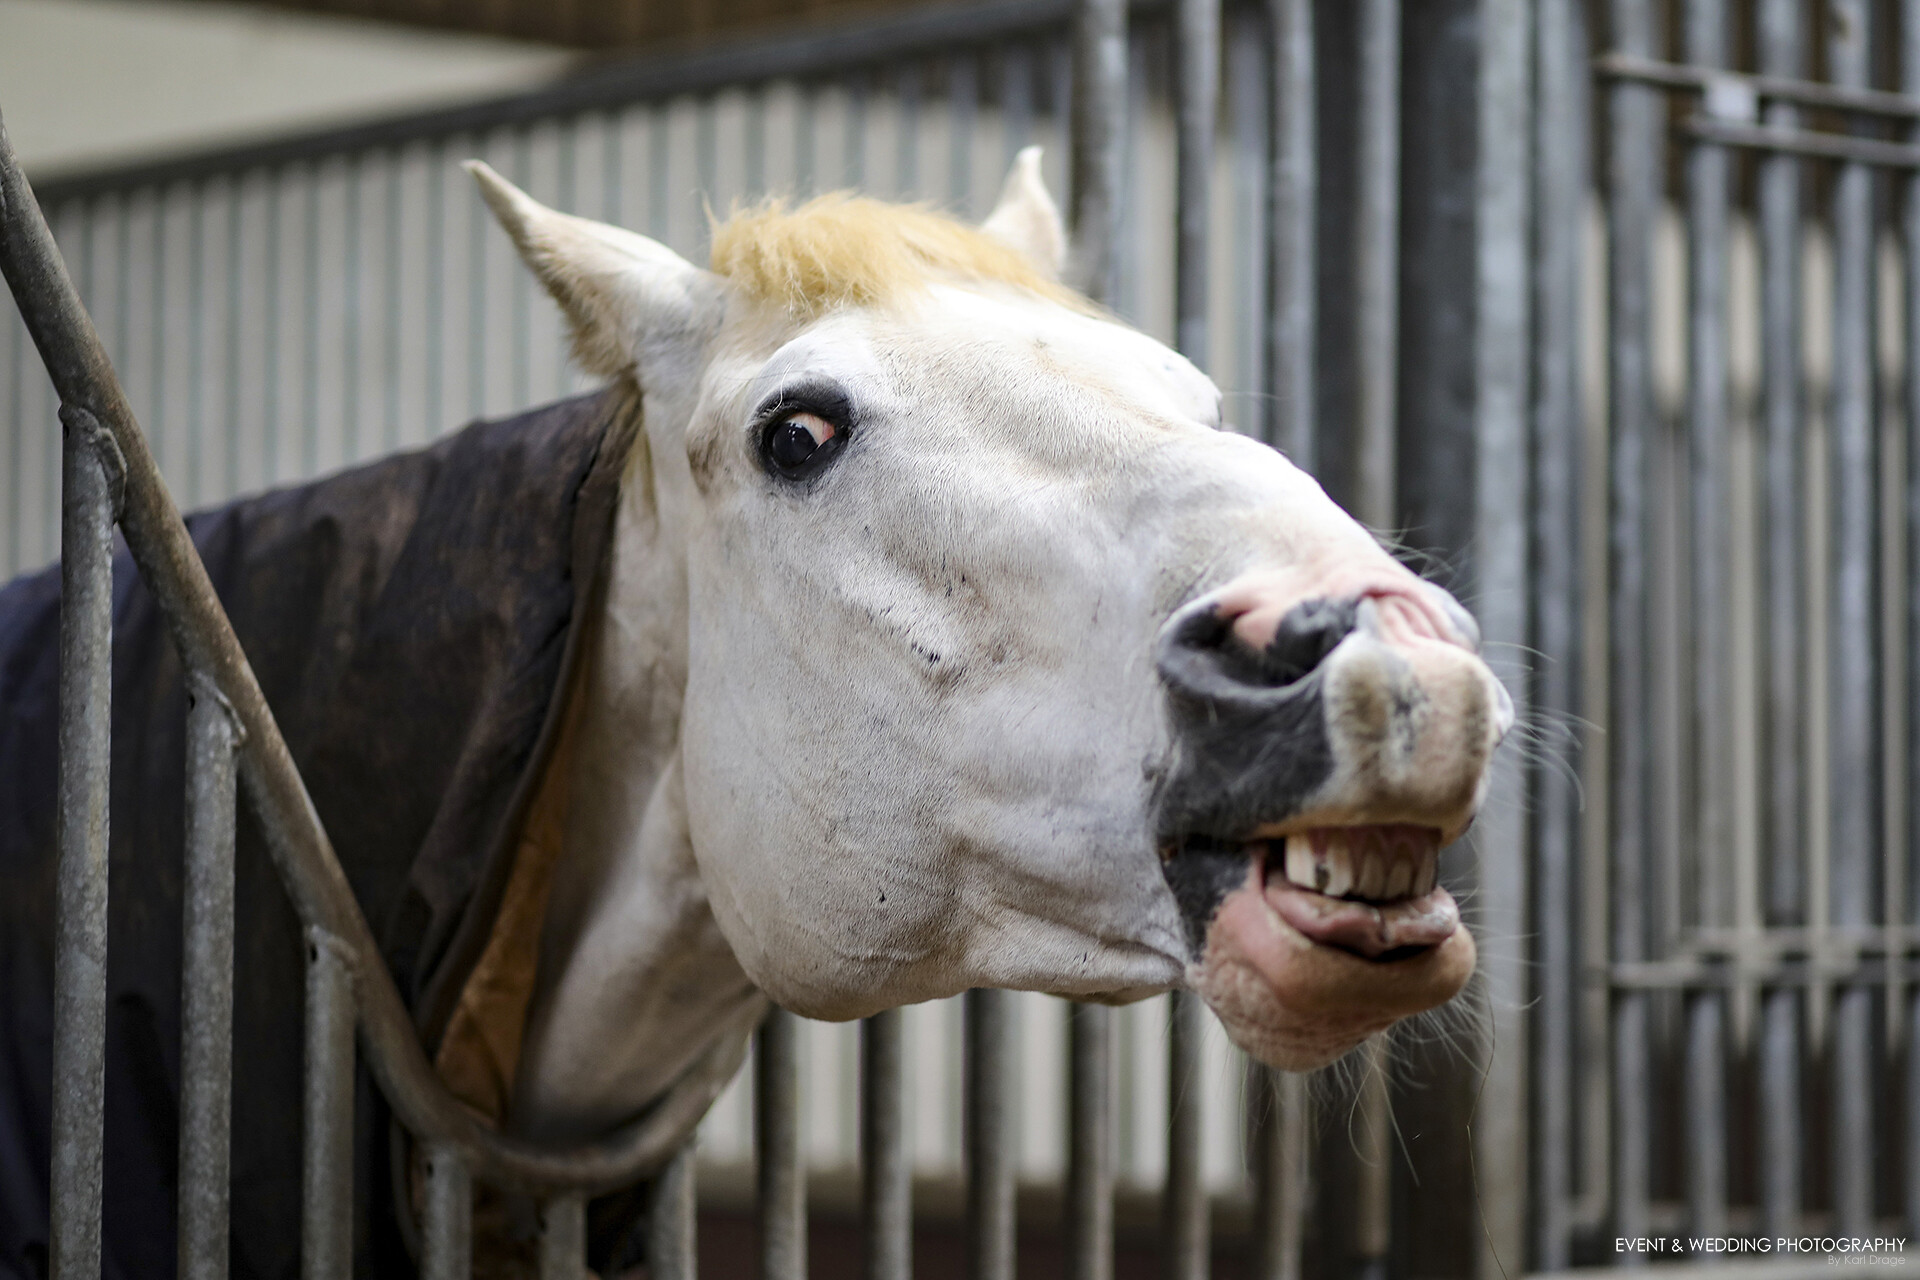 Funny horse face